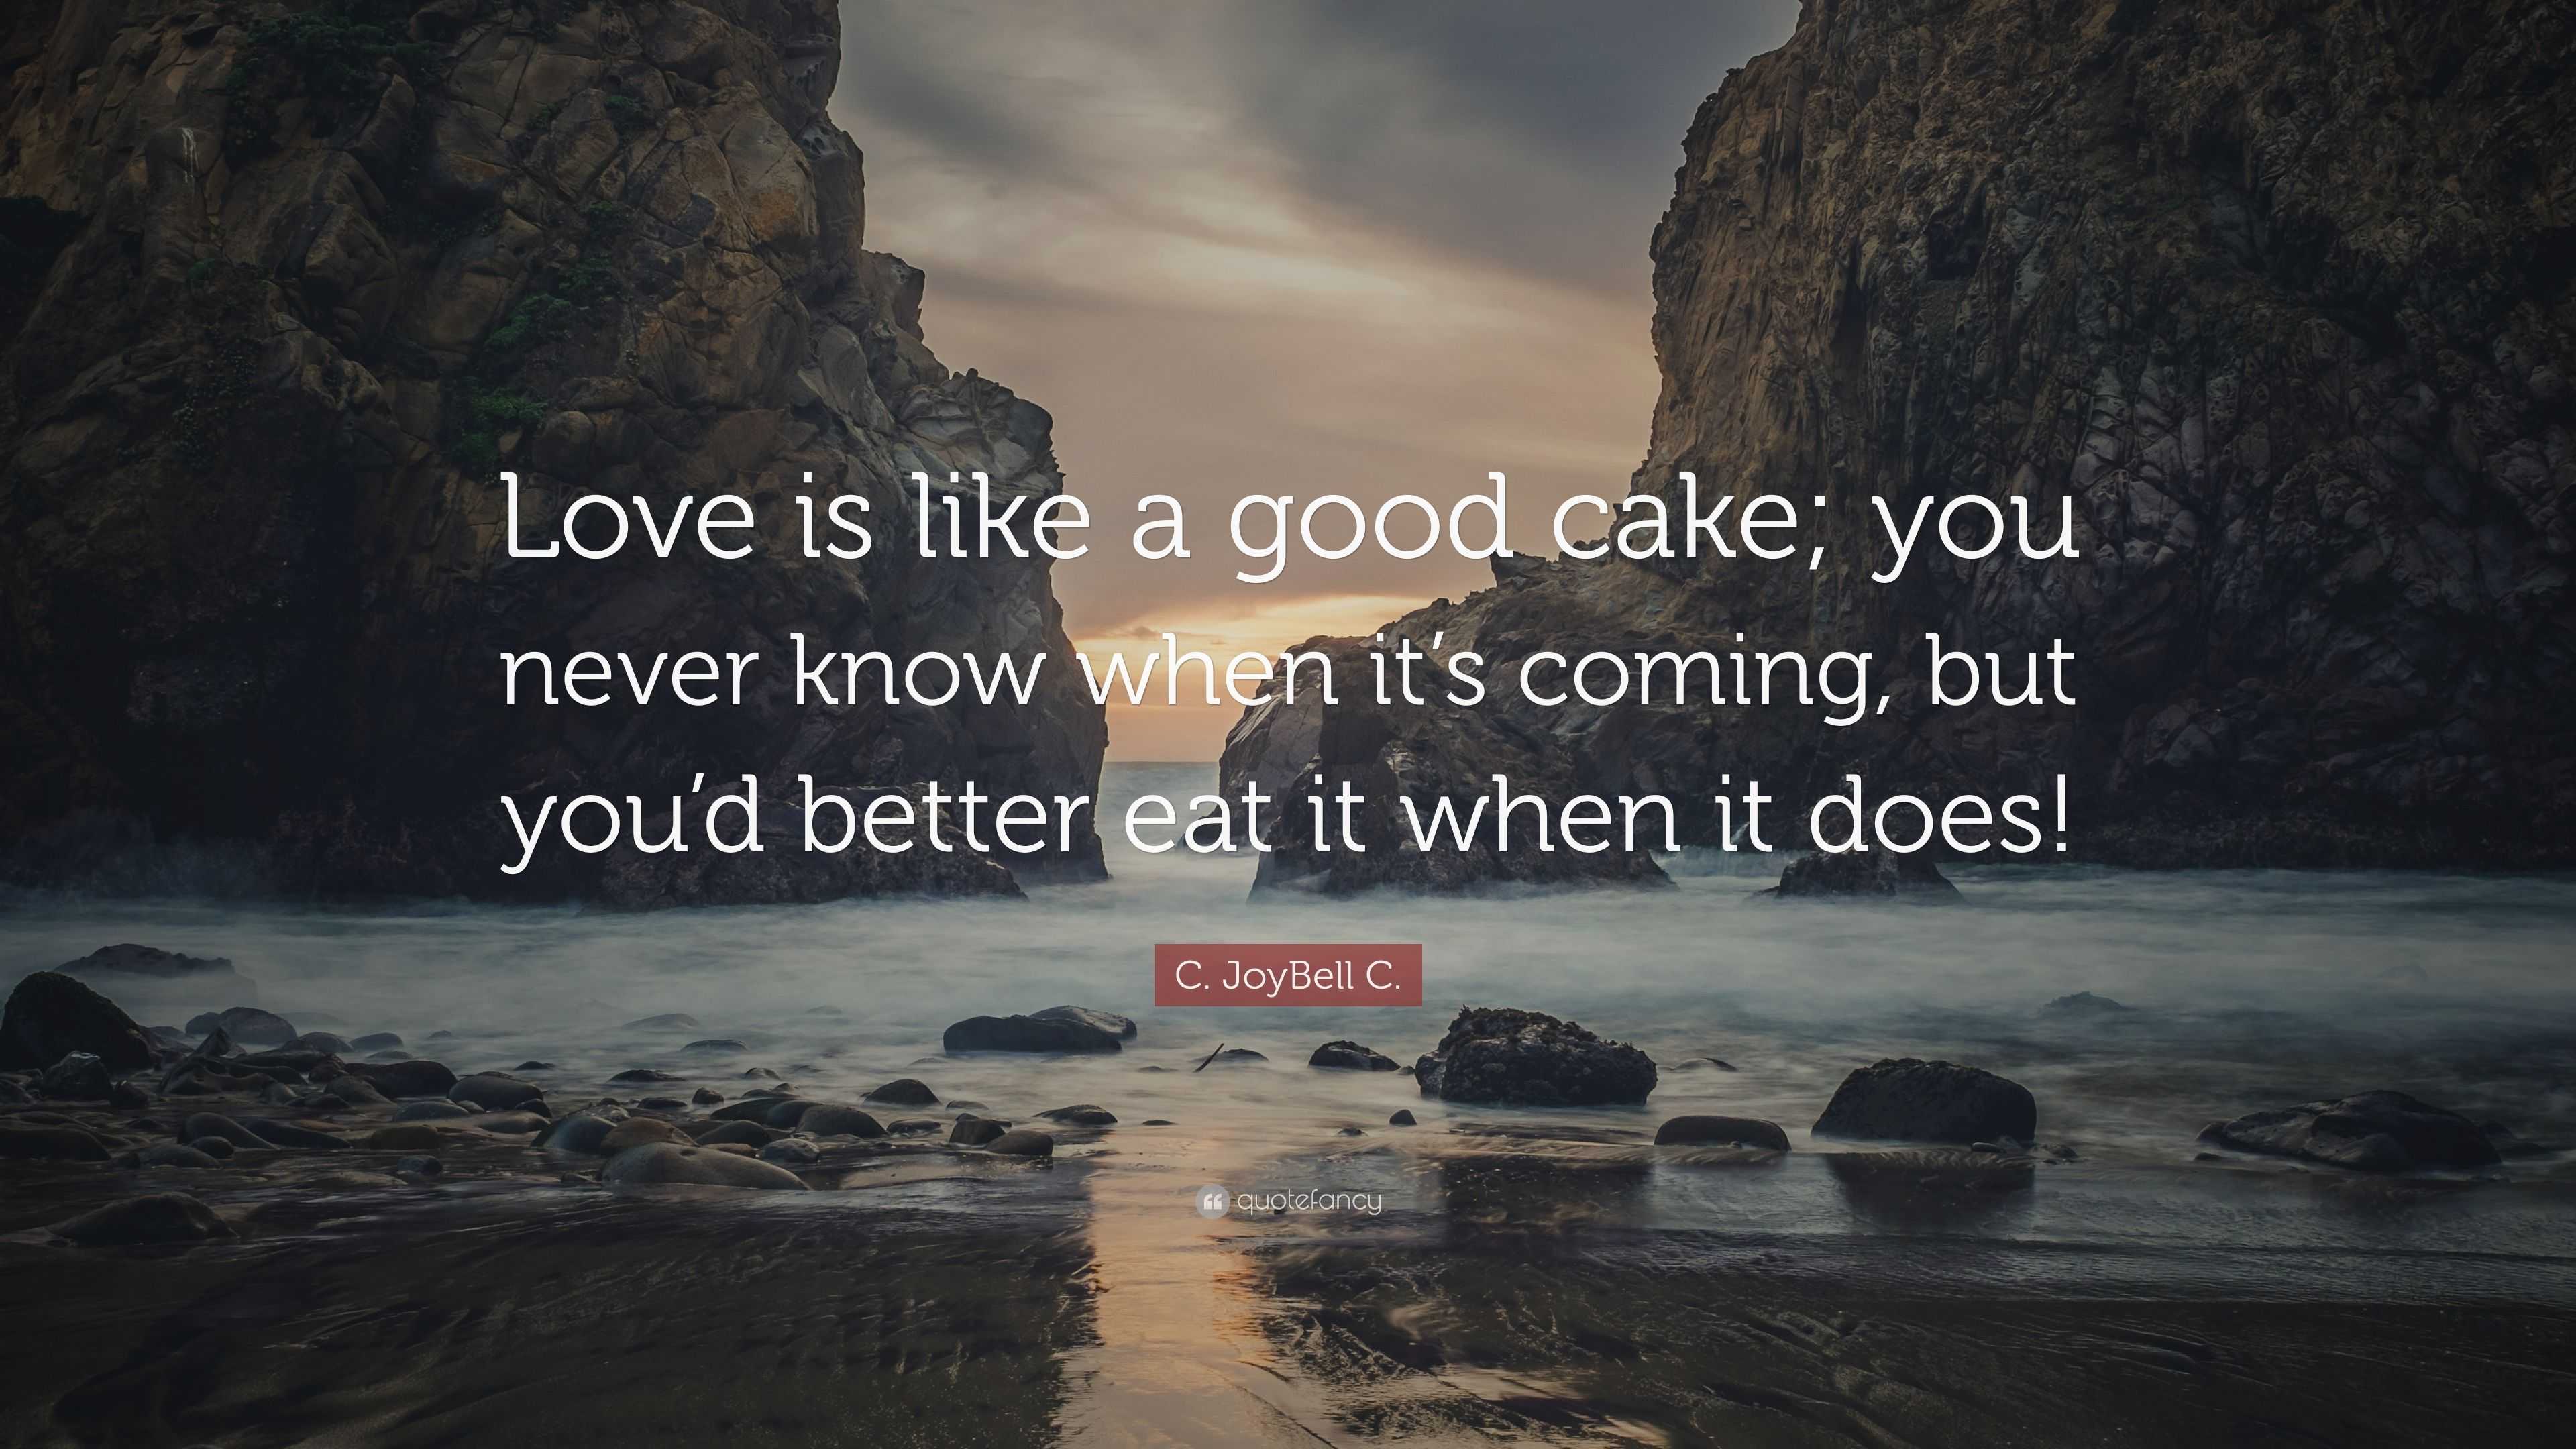 C JoyBell C Quote “Love is like a good cake you